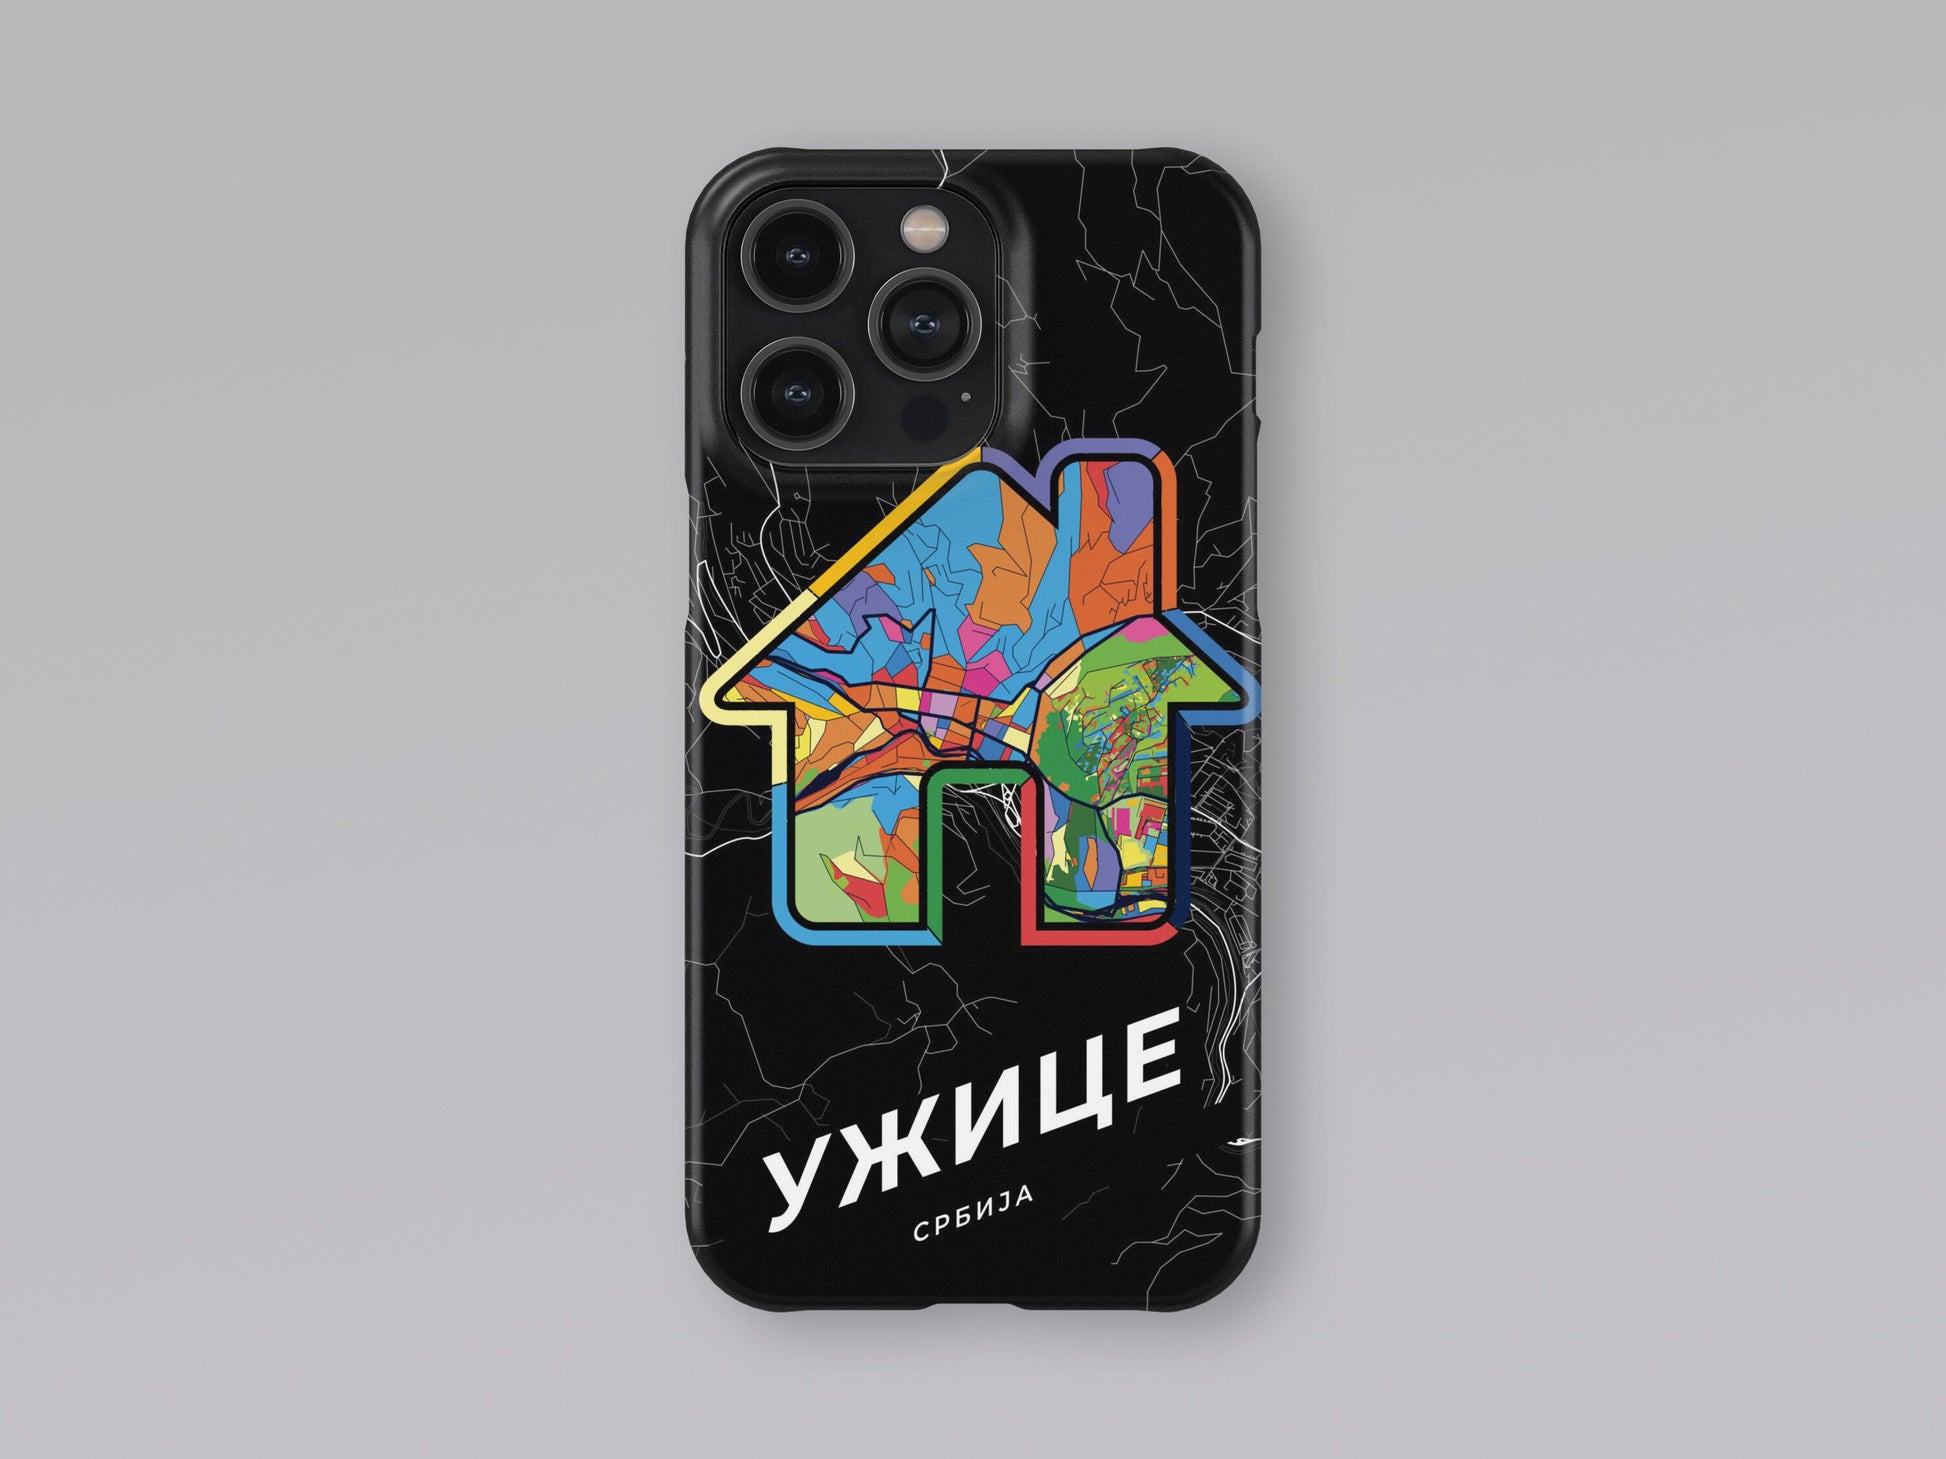 Užice Serbia slim phone case with colorful icon 3